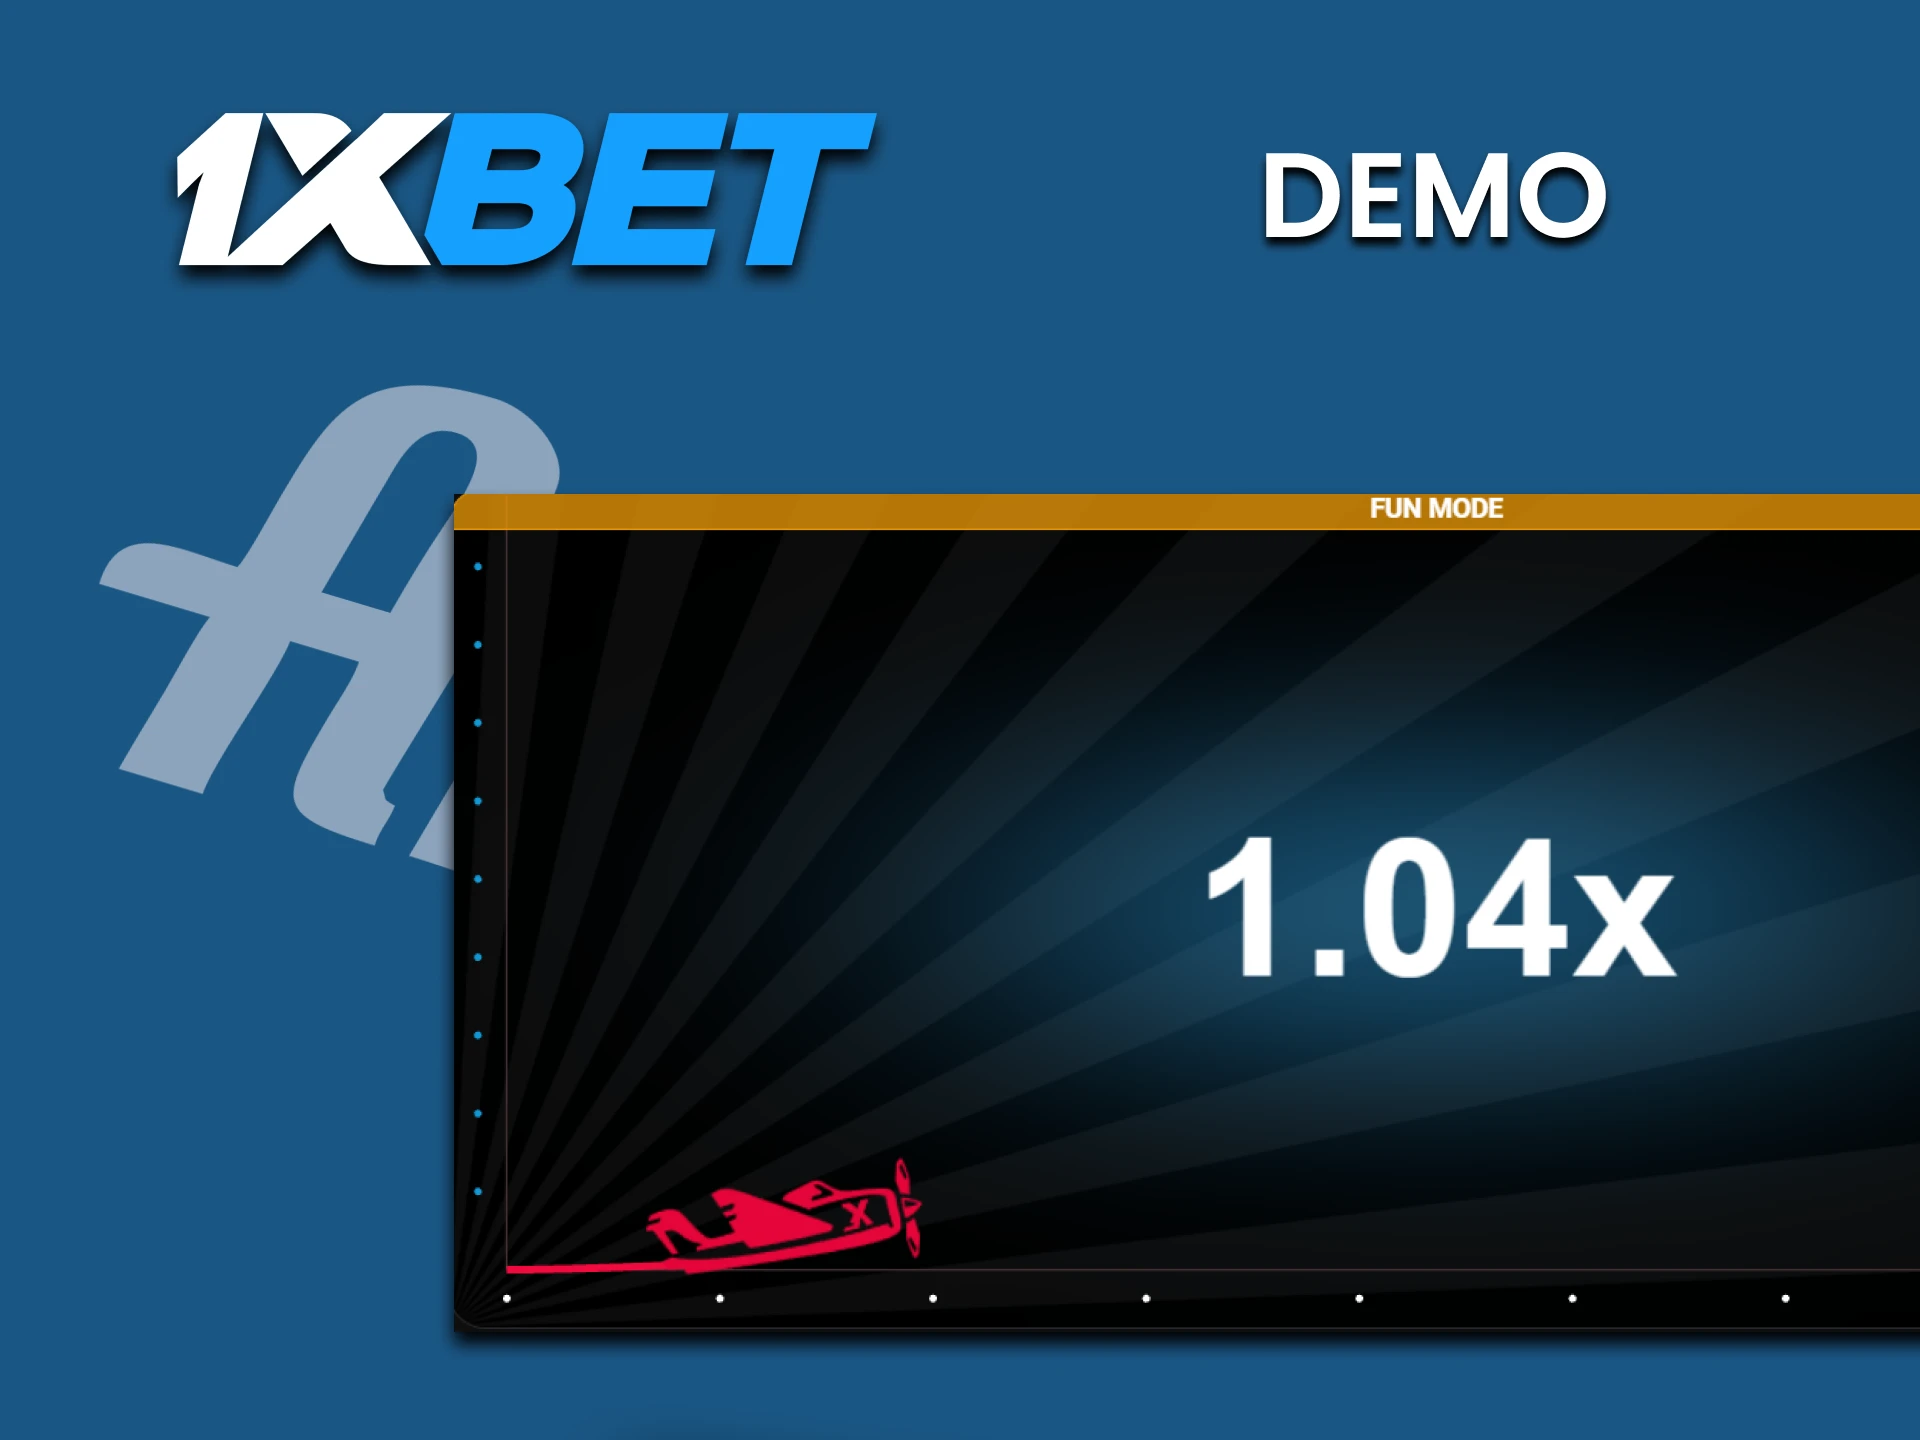 You can conduct training in the demo version of the Aviator game on 1xbet.